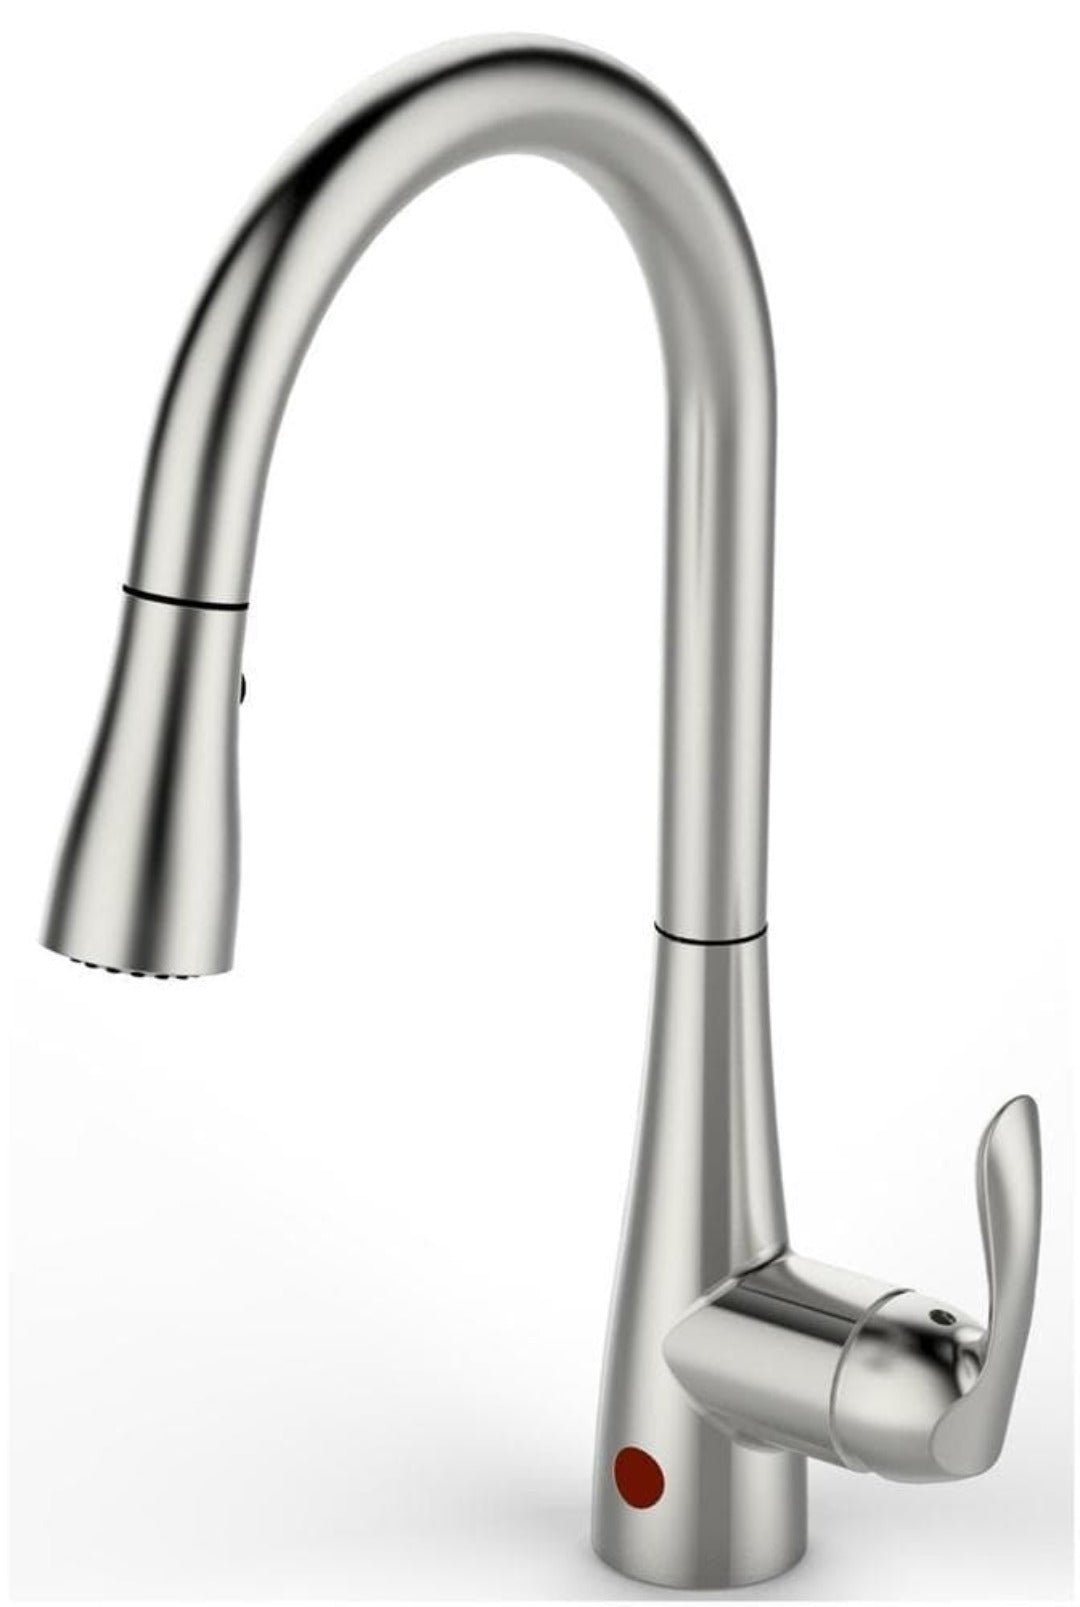 Flow Motion Activated Touch-less Kitchen Faucet with Single Pull Down - Senior.com Faucets